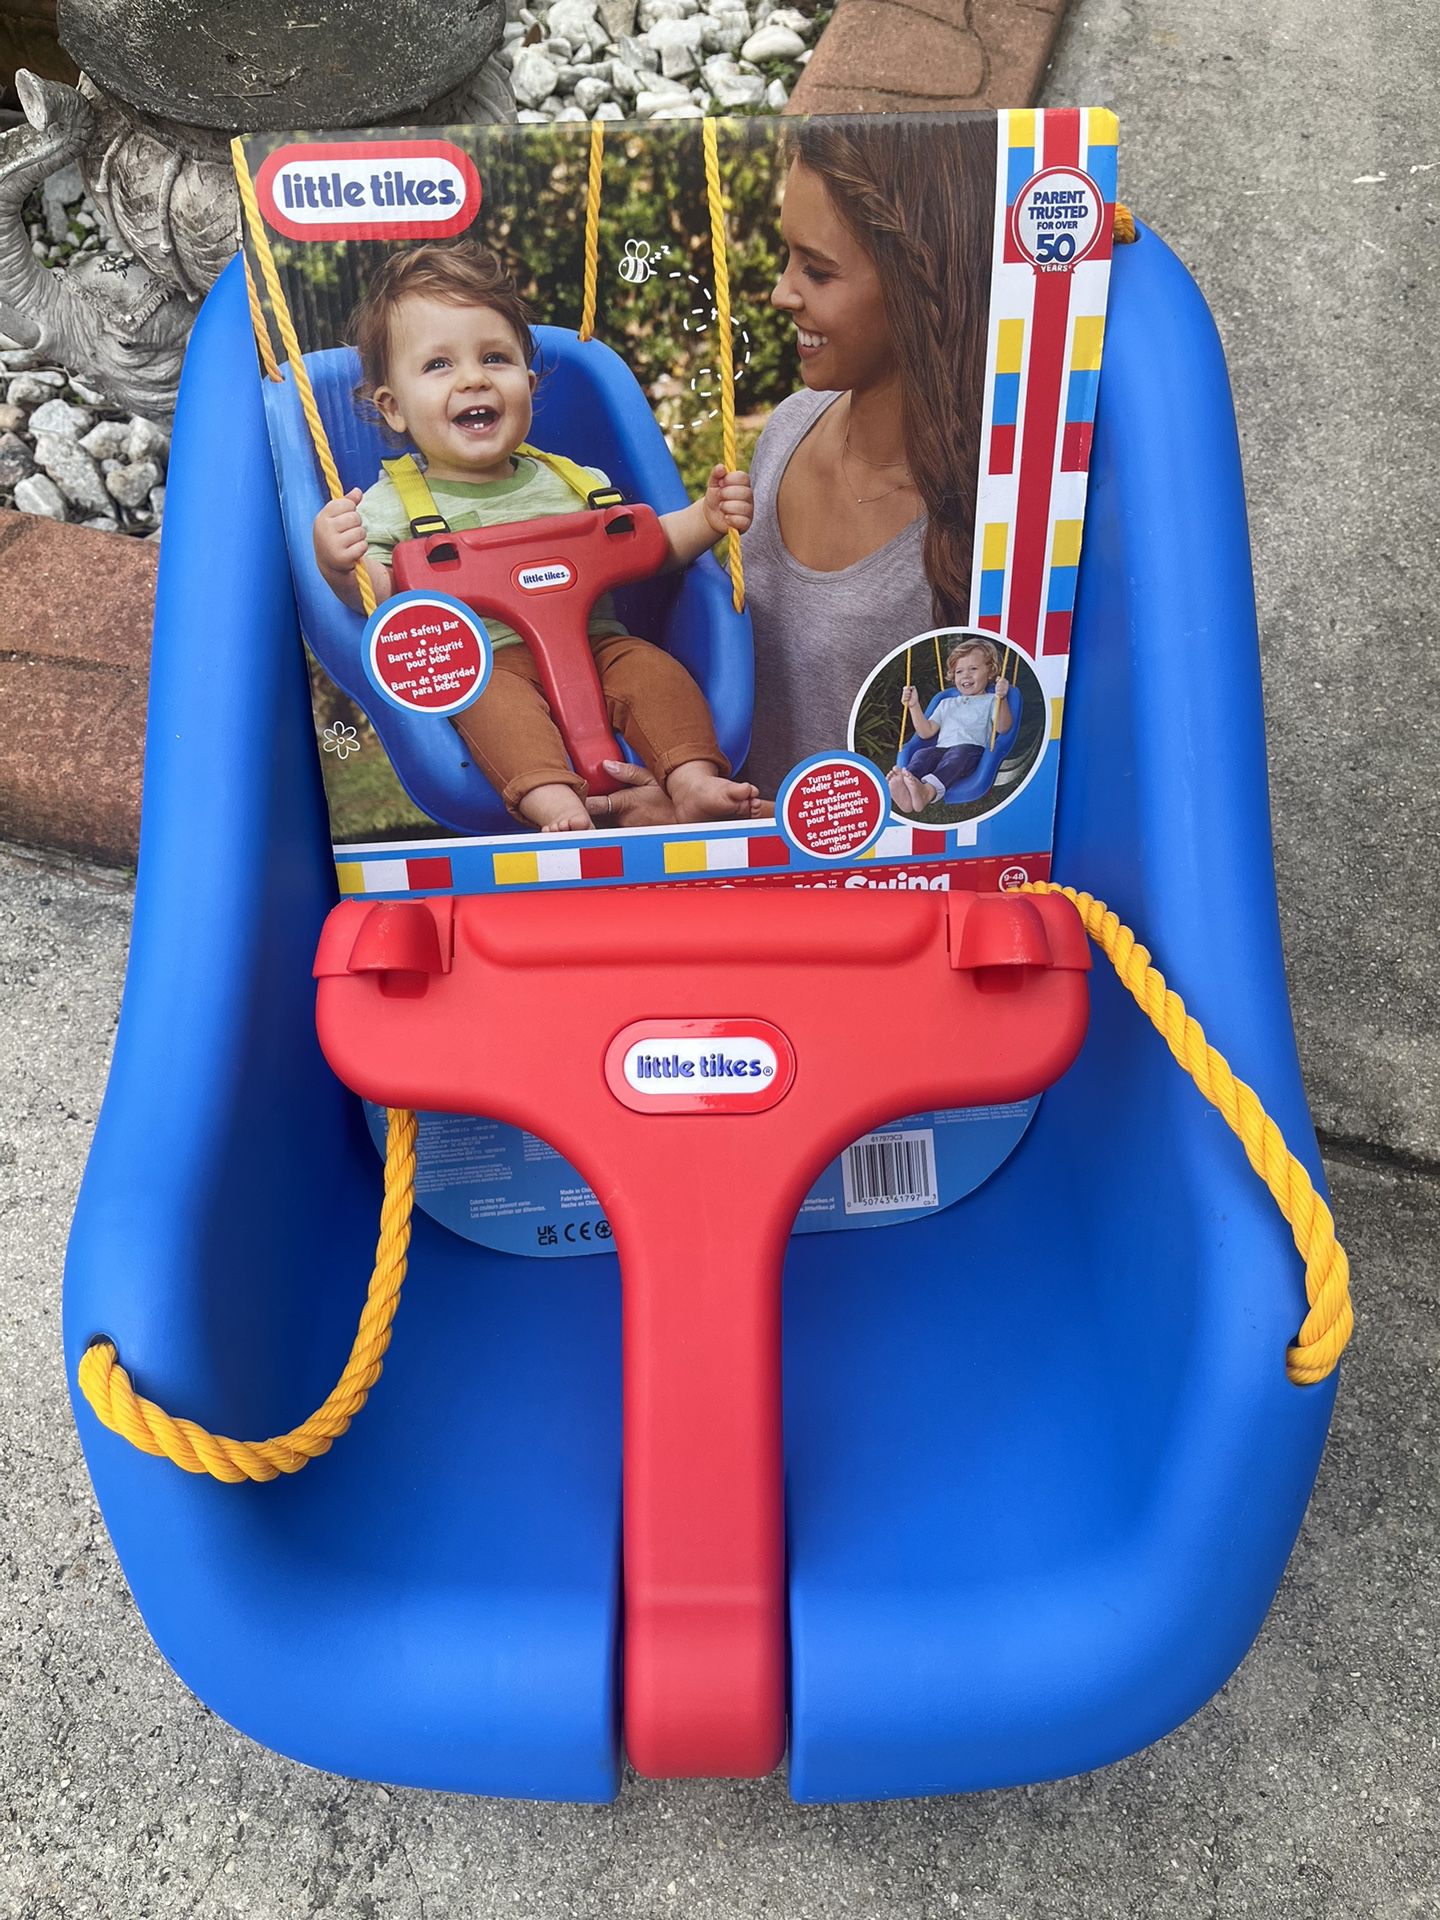 New Little Tikes Snug & Secure Toddler Swing